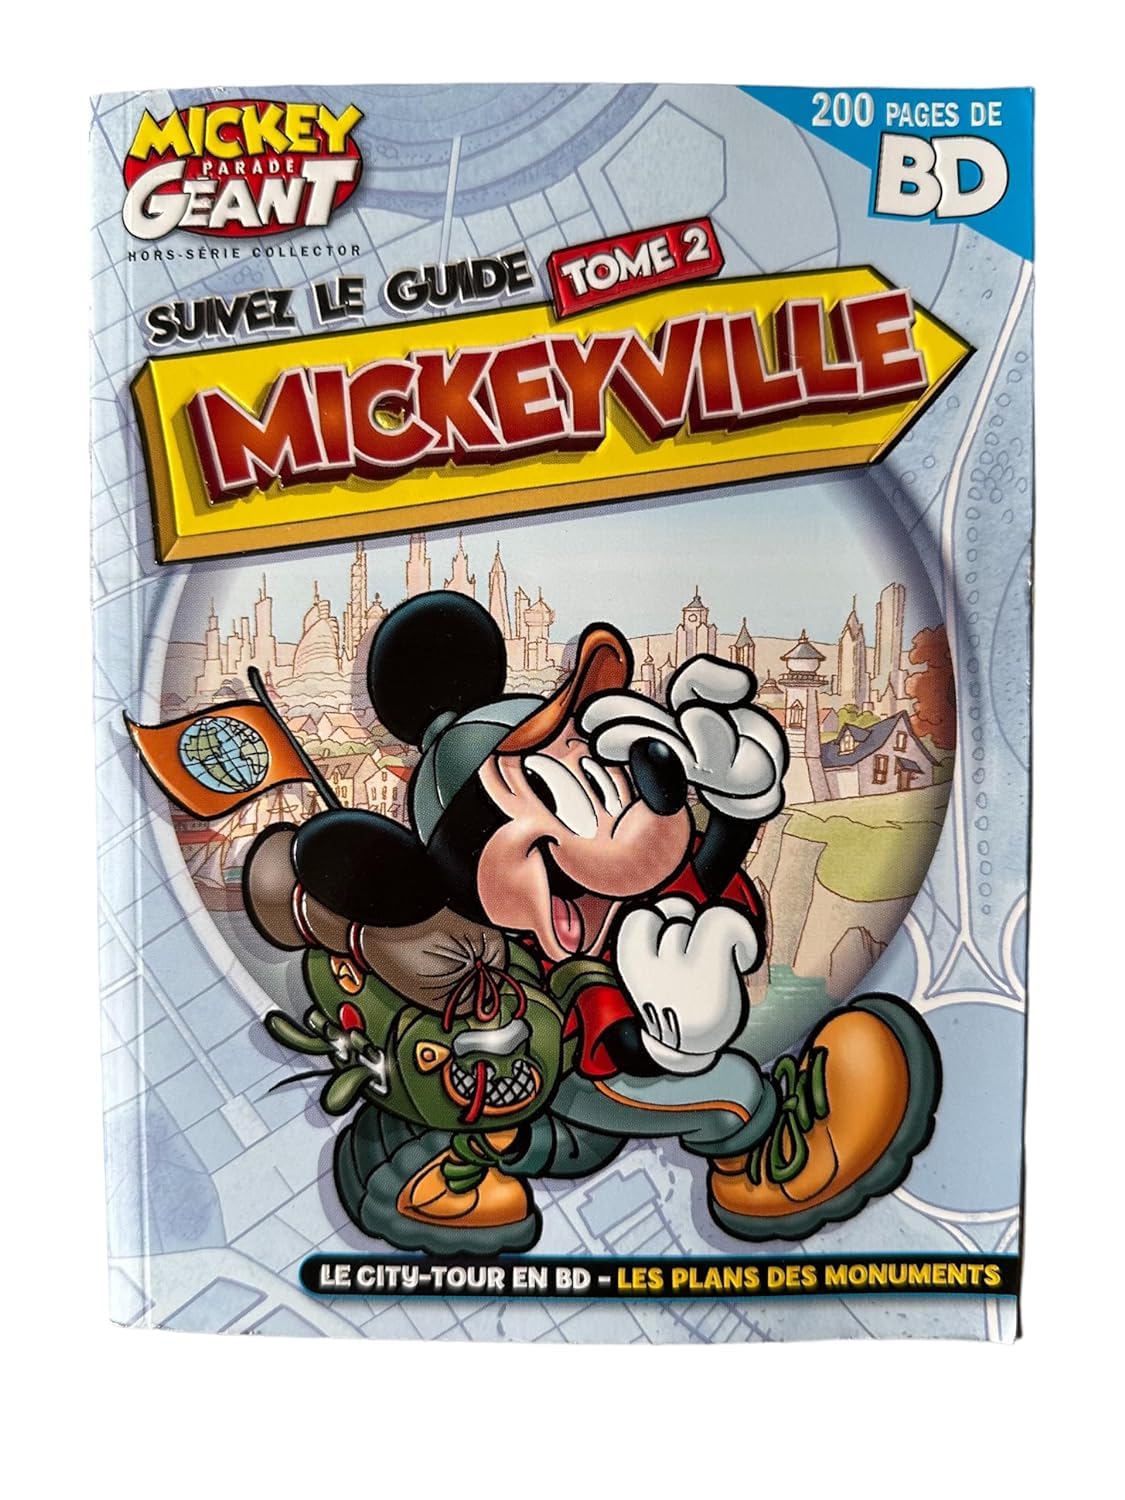 Mickey Parade Géant HS Tome 2 : Suivez le guide Mickeyville